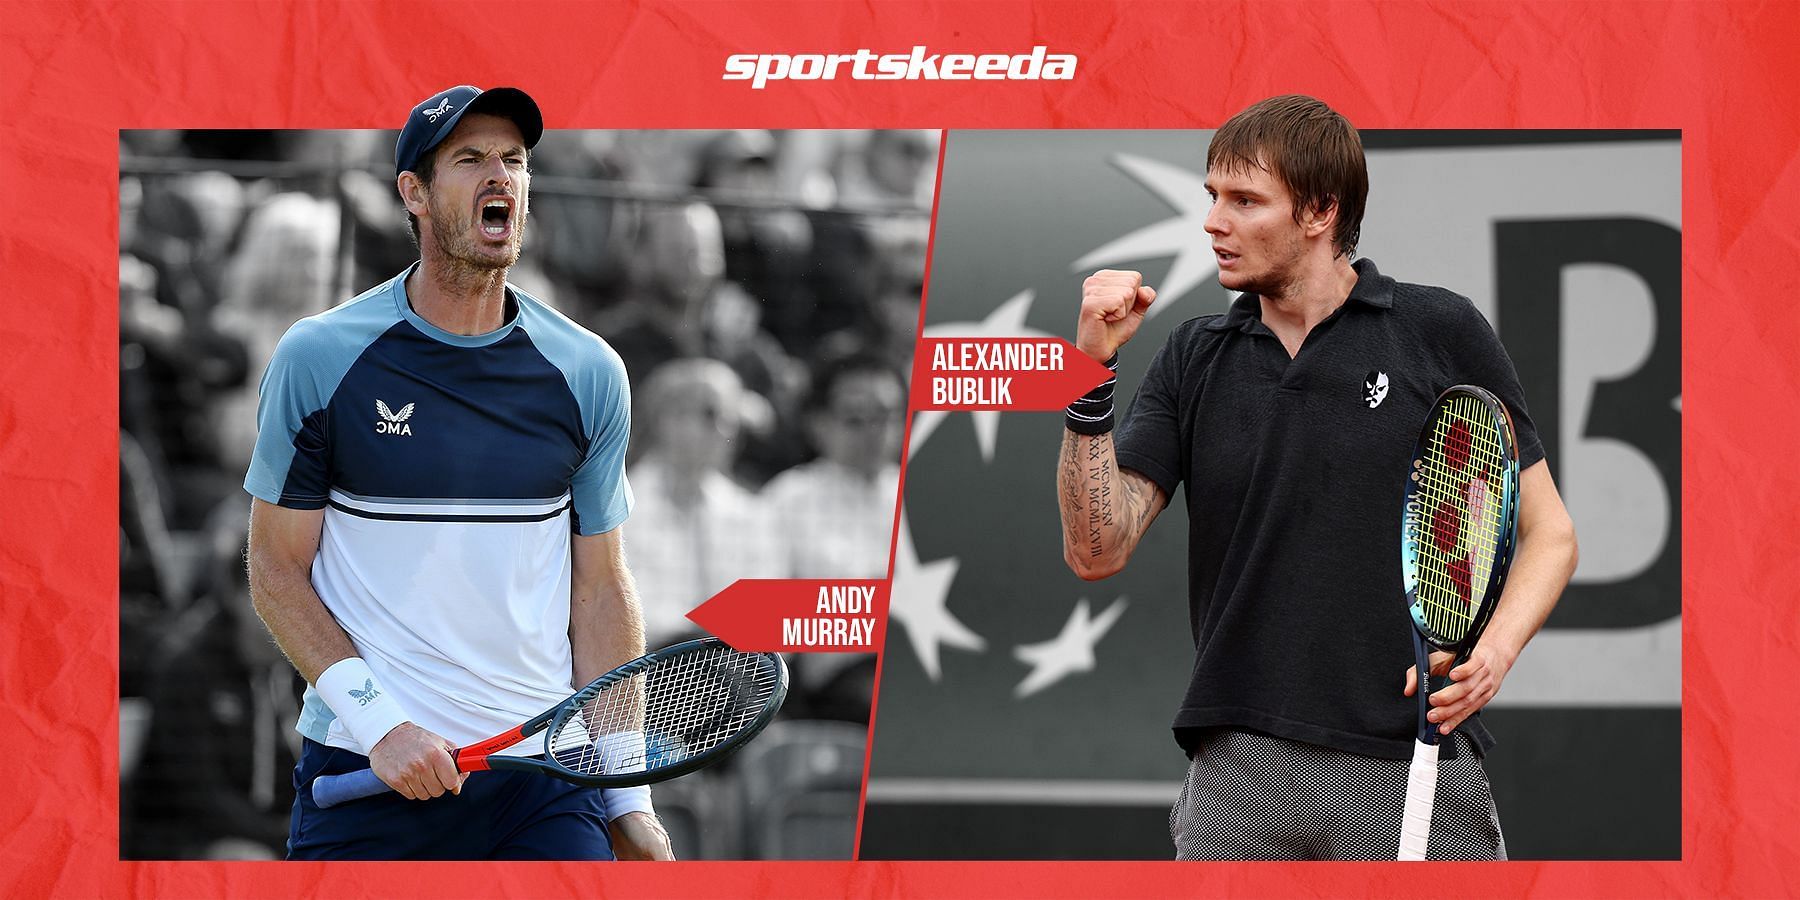 Andy Murray and Alexander Bublik are set to meet for the third time this year